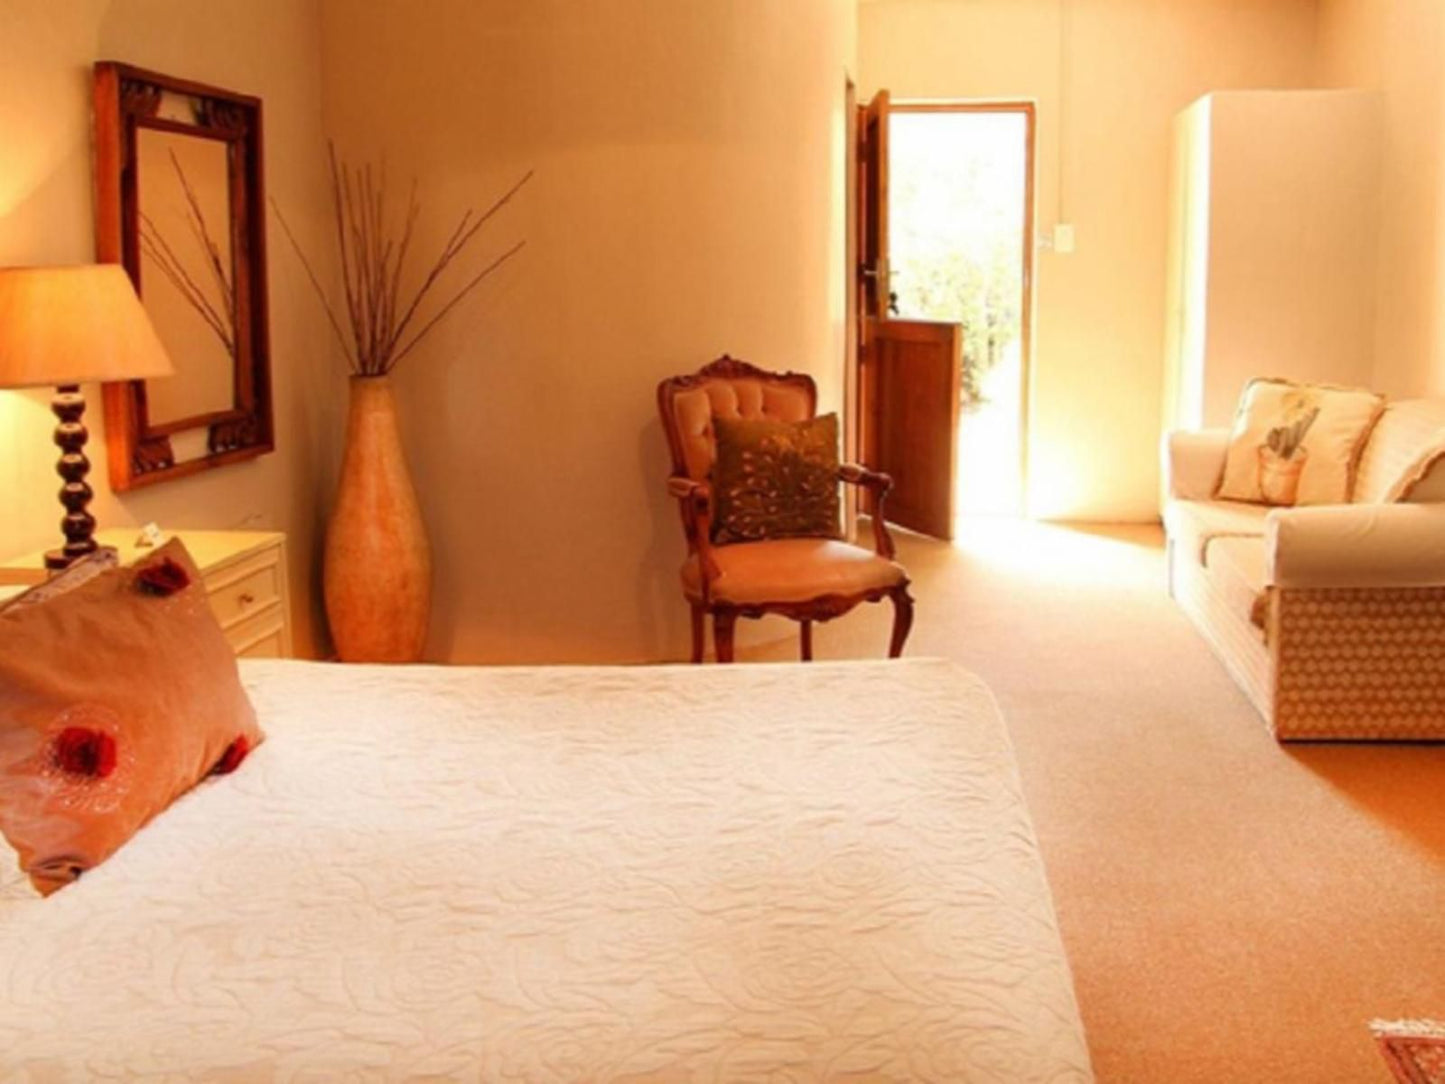 Fynbos Guest House Riversdale Western Cape South Africa Sepia Tones, Bedroom